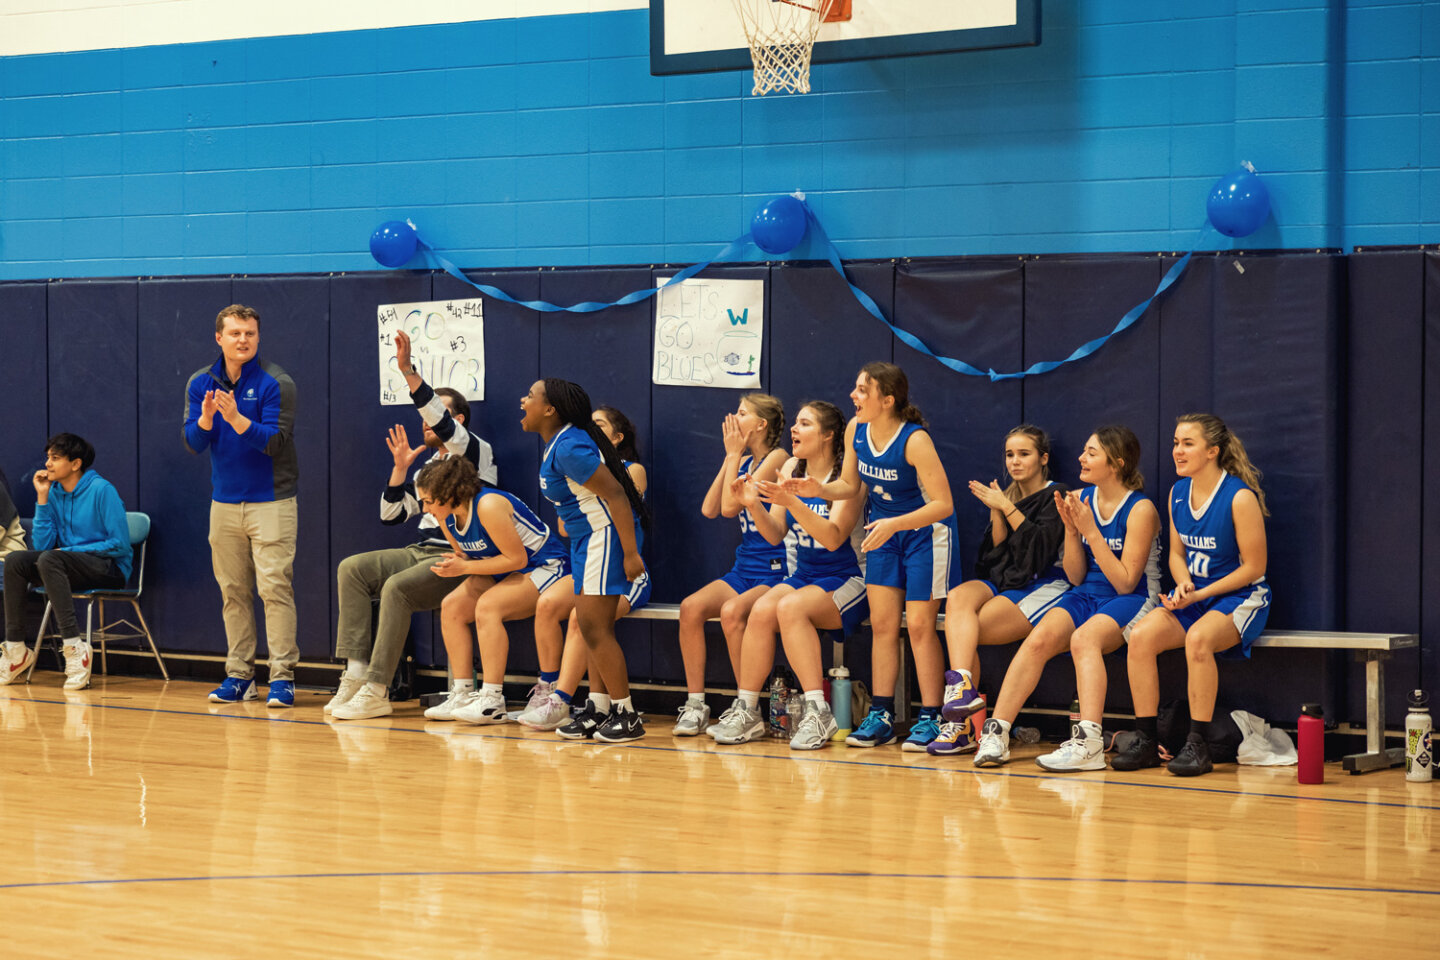 Girls basketball team cheer their teammates from the sidelines with the coach during a game